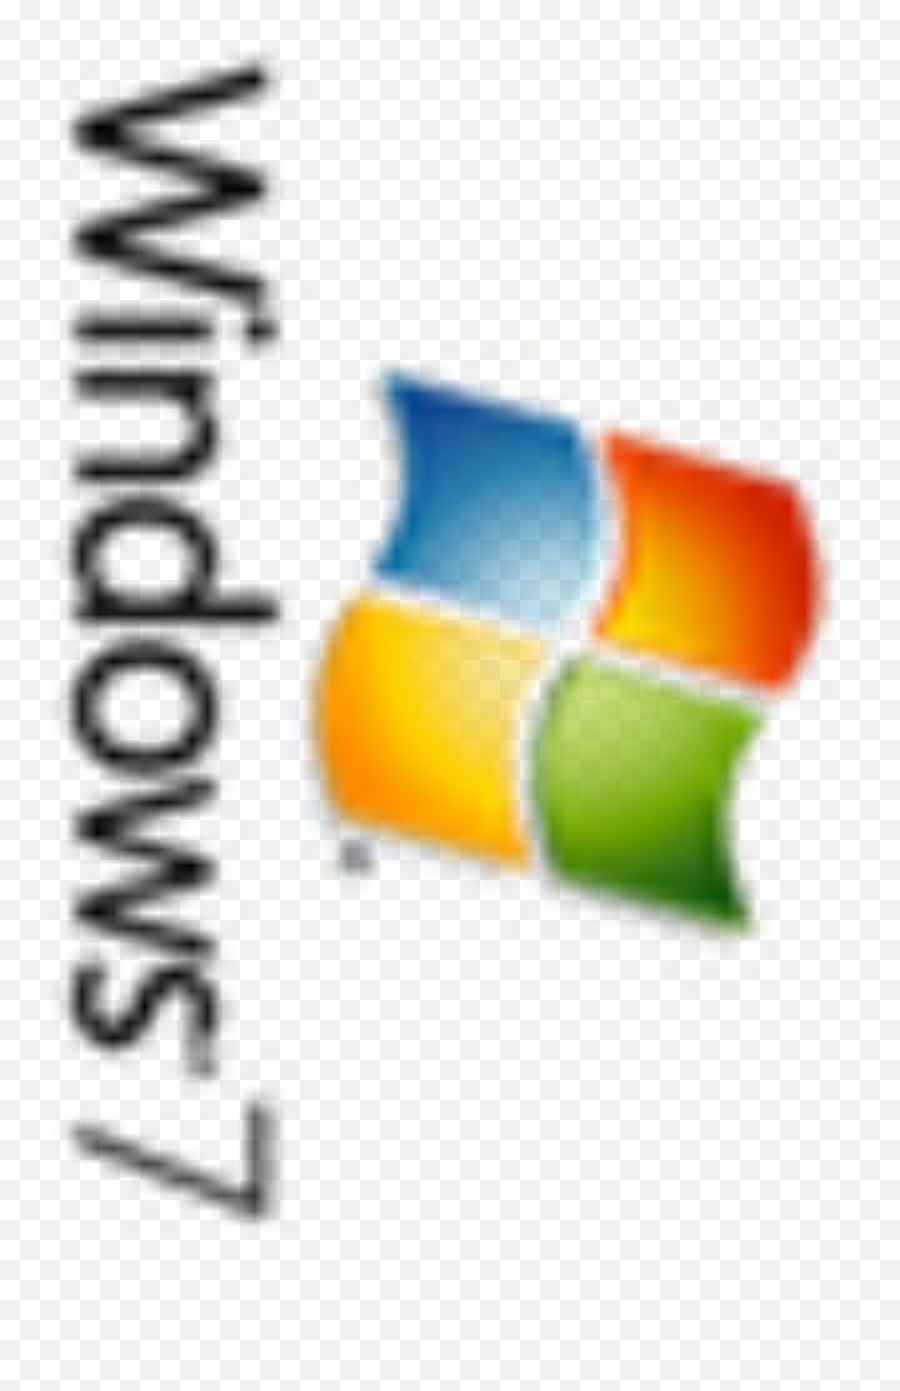 Wat Update Kb971033 Is Live To Kill Cracked U0026 Pirated - Windows Png,Windows 7 Logo Png